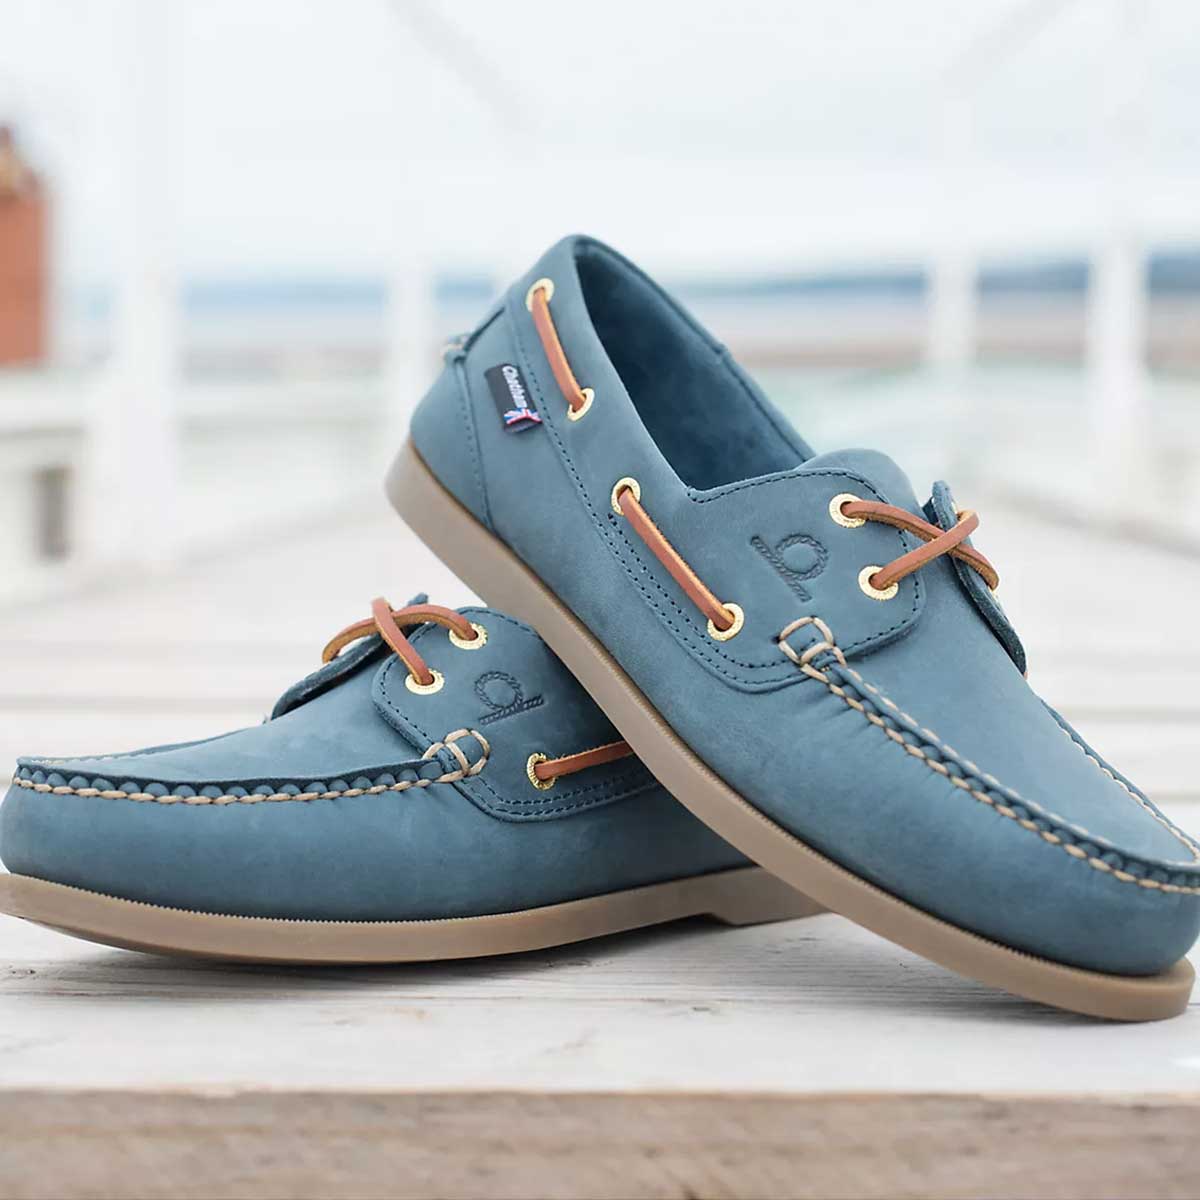 CHATHAM Mens Deck II G2 Leather Boat Shoes - Blue